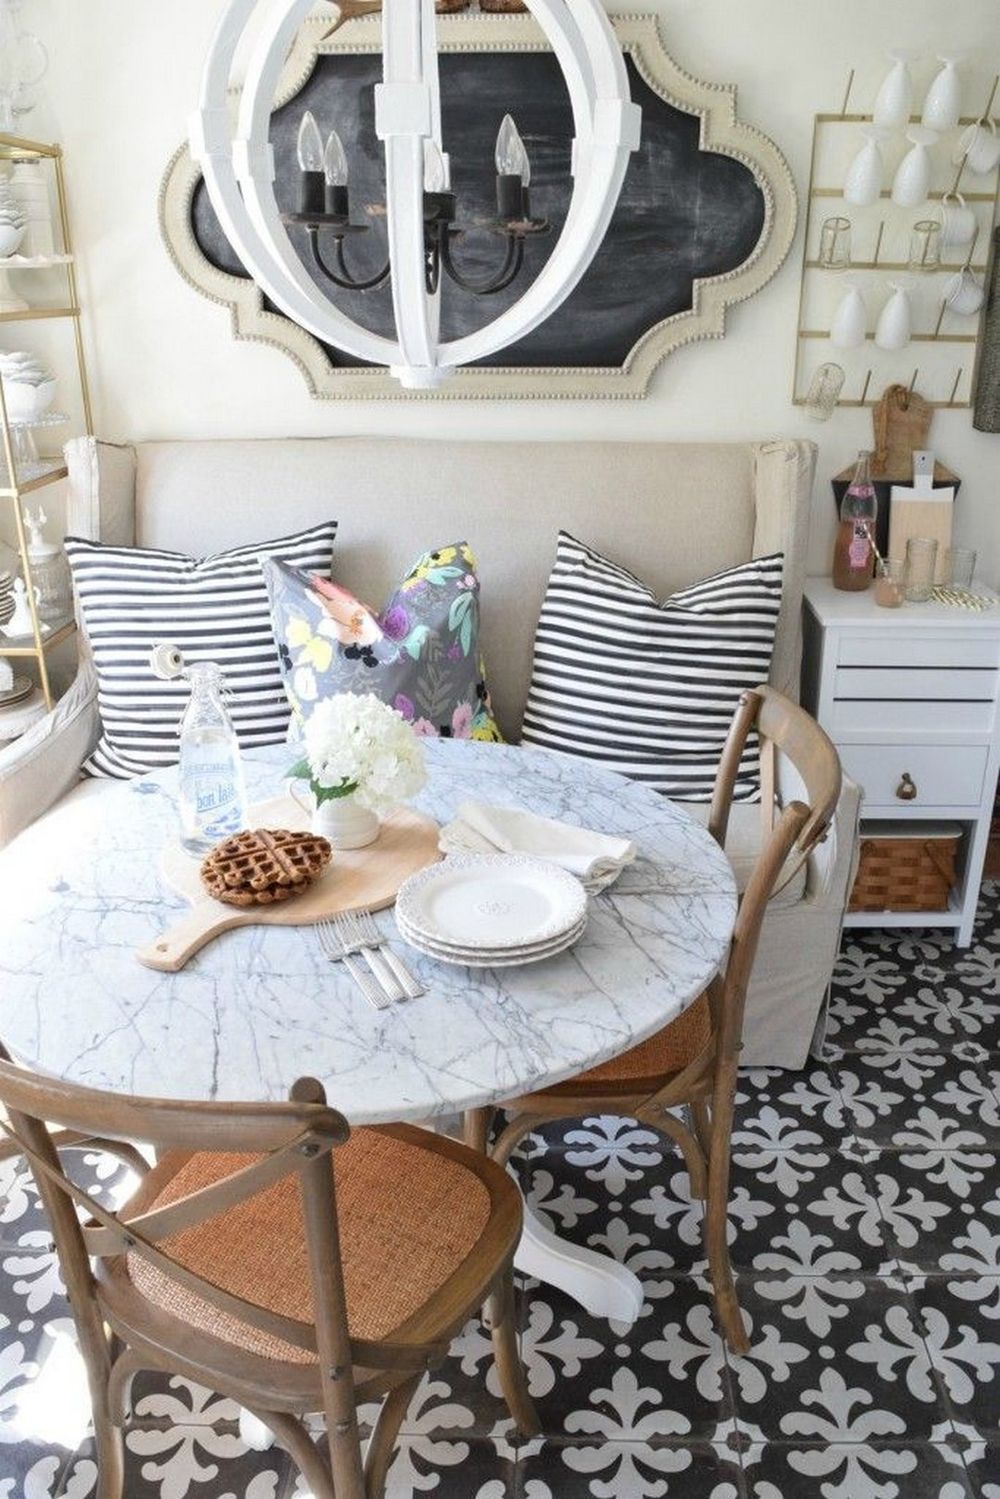 French Country Tile Floors in Breakfast Nook